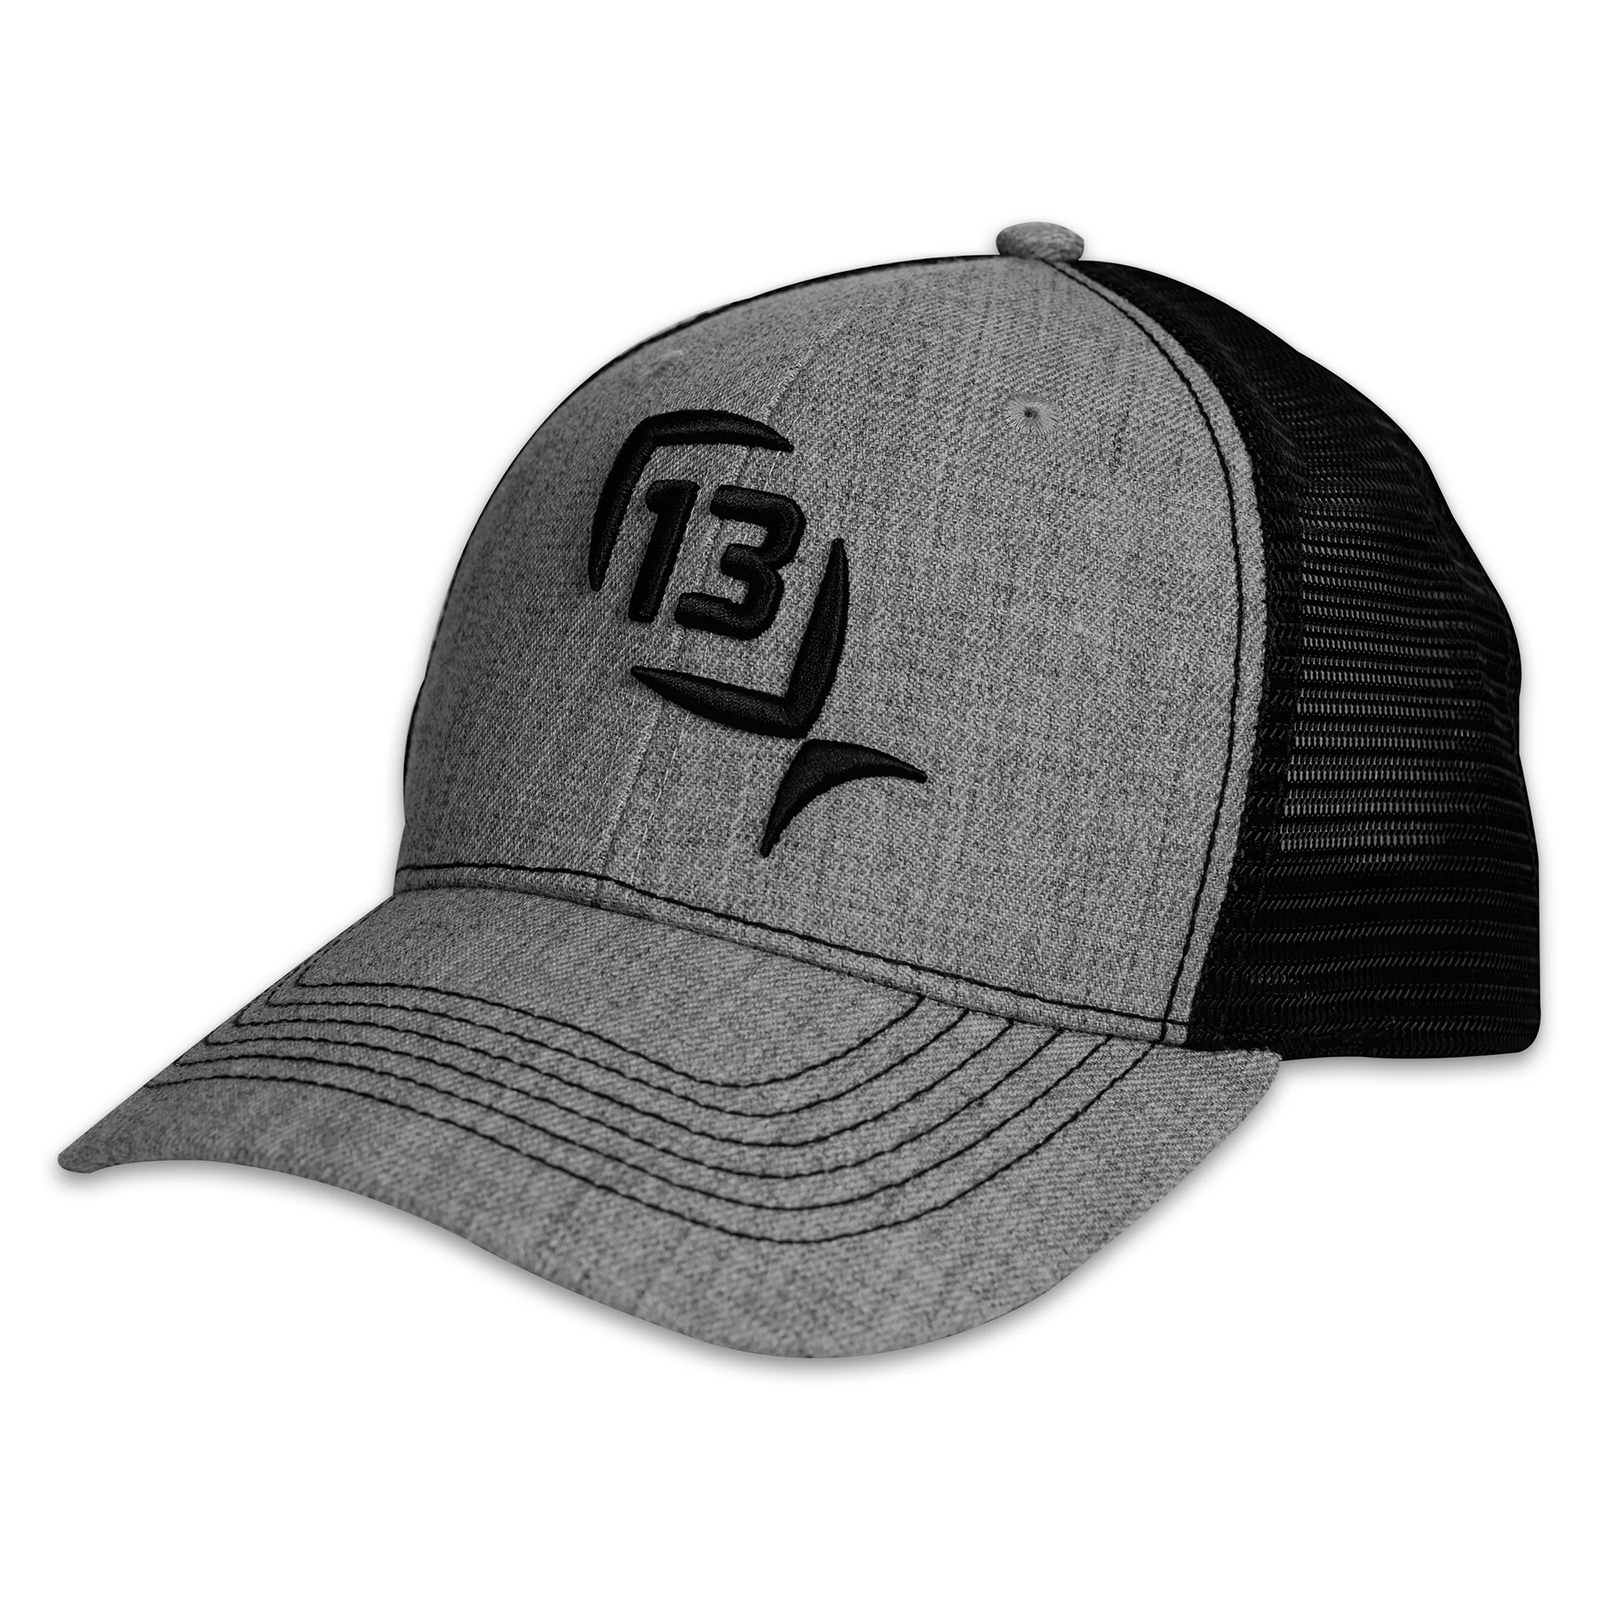 https://static.upnorthsports.com/Image/catimages/13-fishing-hat-1600.png